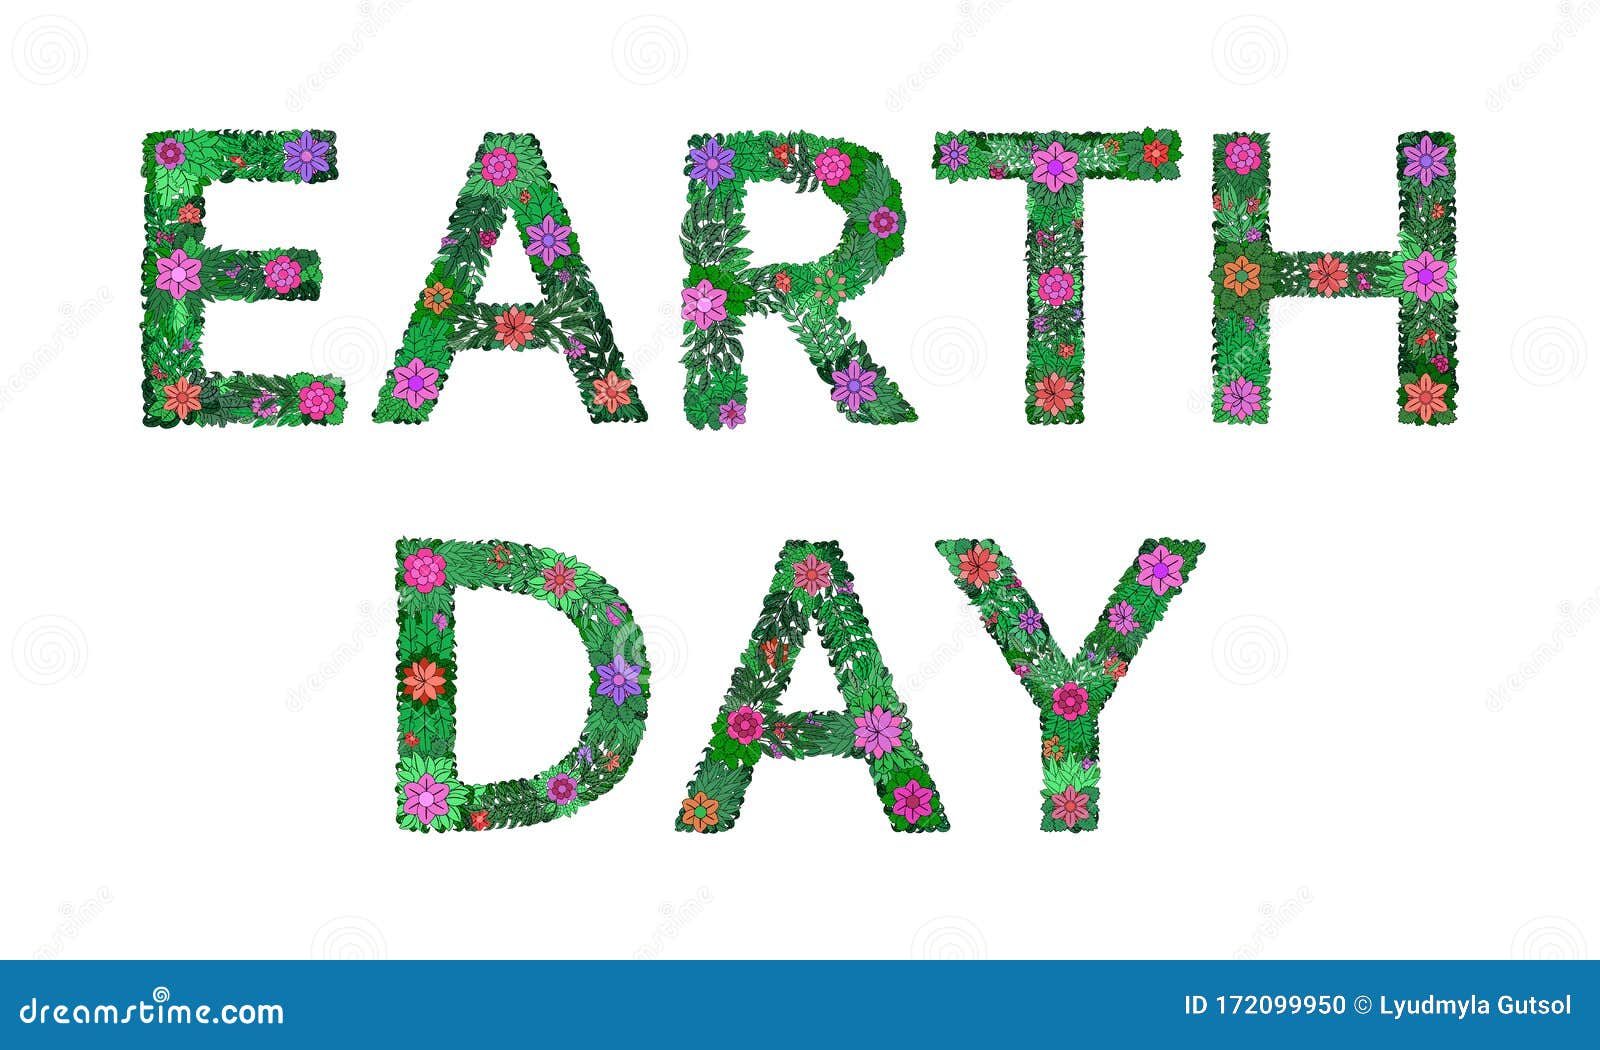 The Earth is surrounded by flowers, Happy Earth Day. Vector